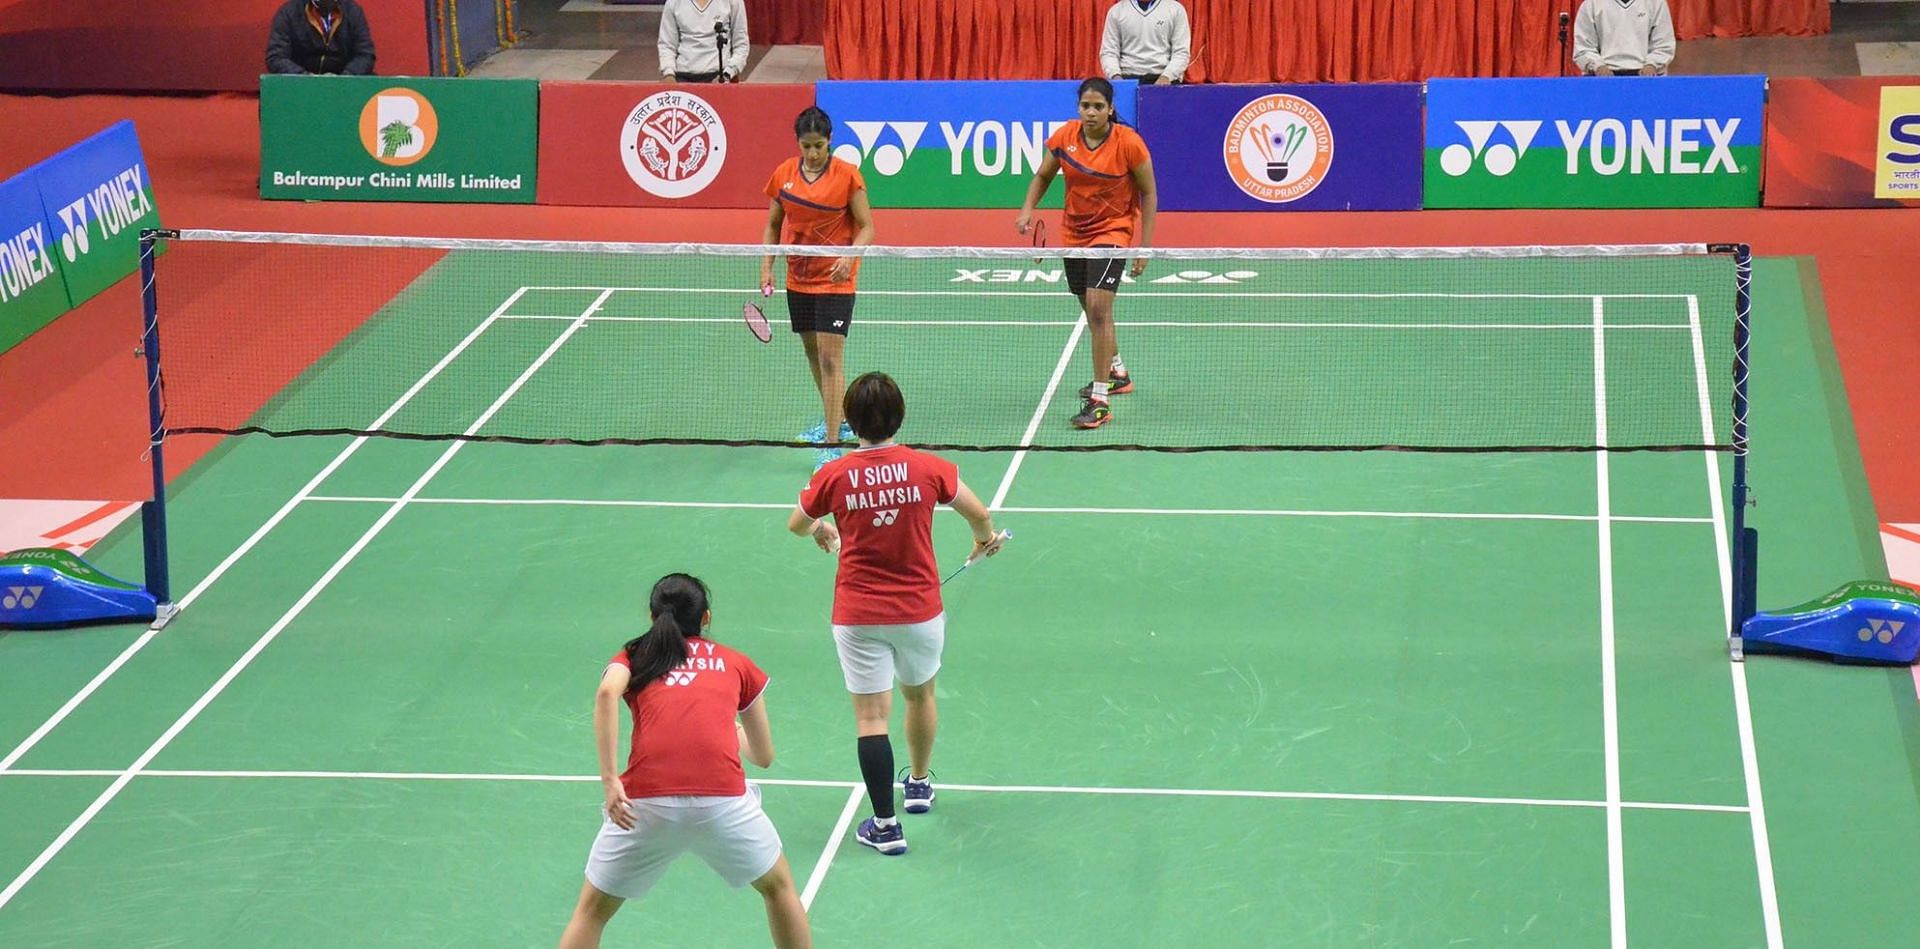 Treesa Jolly and Gayatri Gopichand upset second seeds Lee Sohee and Shin Seungchan of Korea 14-21, 22-20, 21-15 in the women&#039;s doubles quarter-finals in Birmingham on Friday. (Pic credit: BAI)